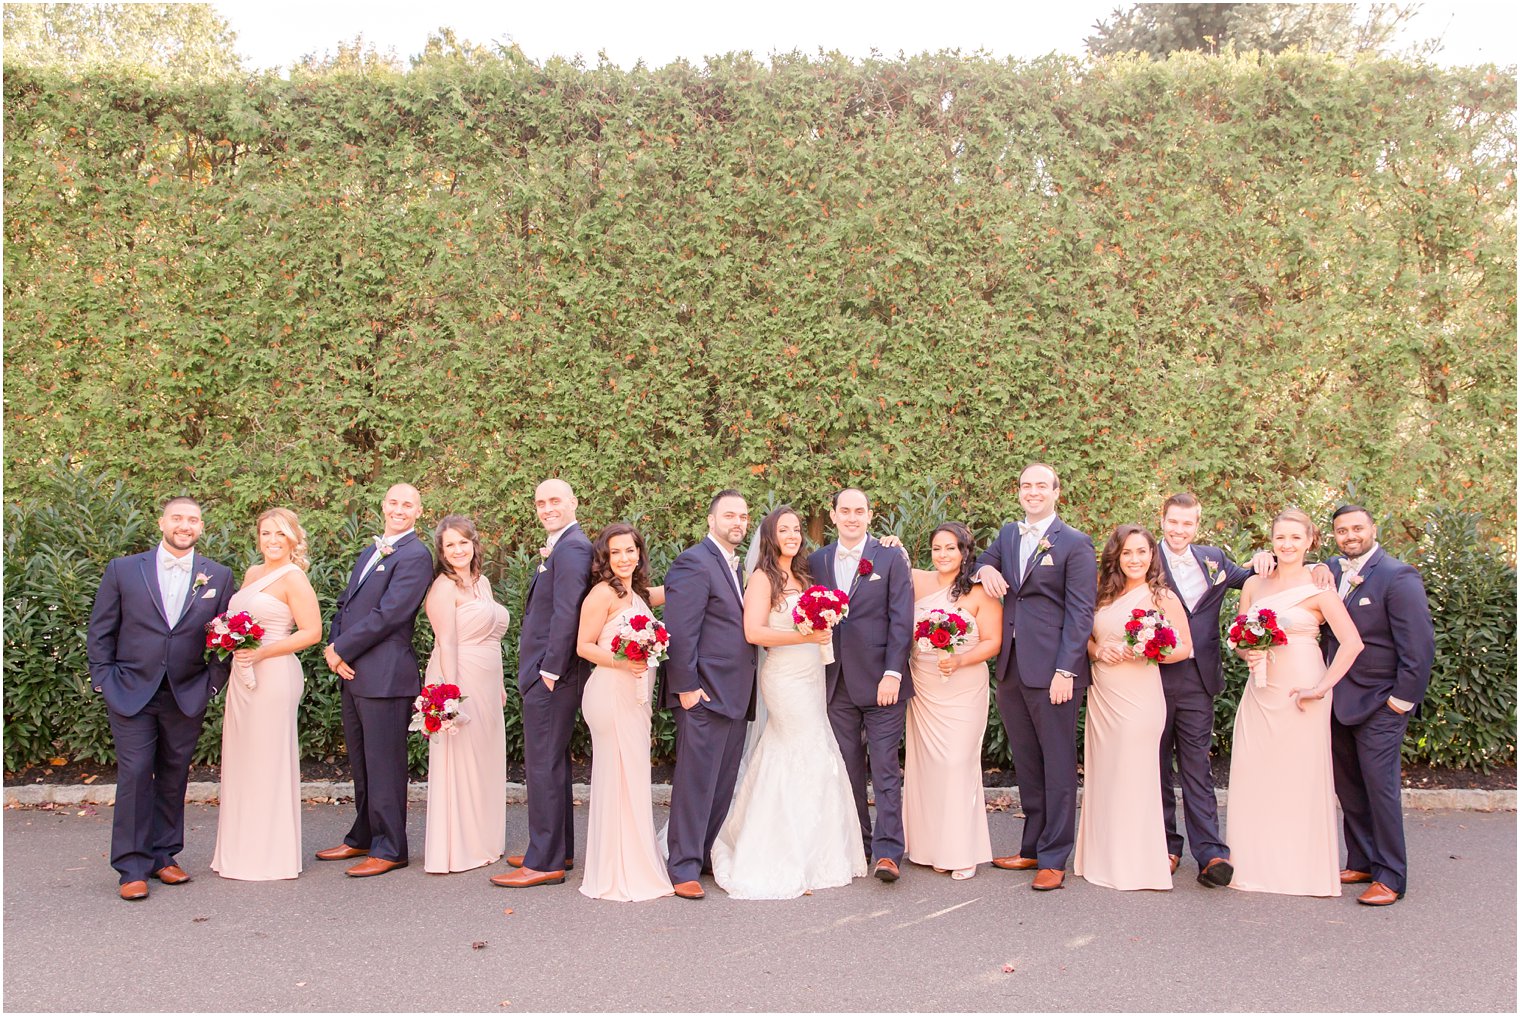 Blush and navy bridal party color palette at Nicotra's Ballroom Wedding